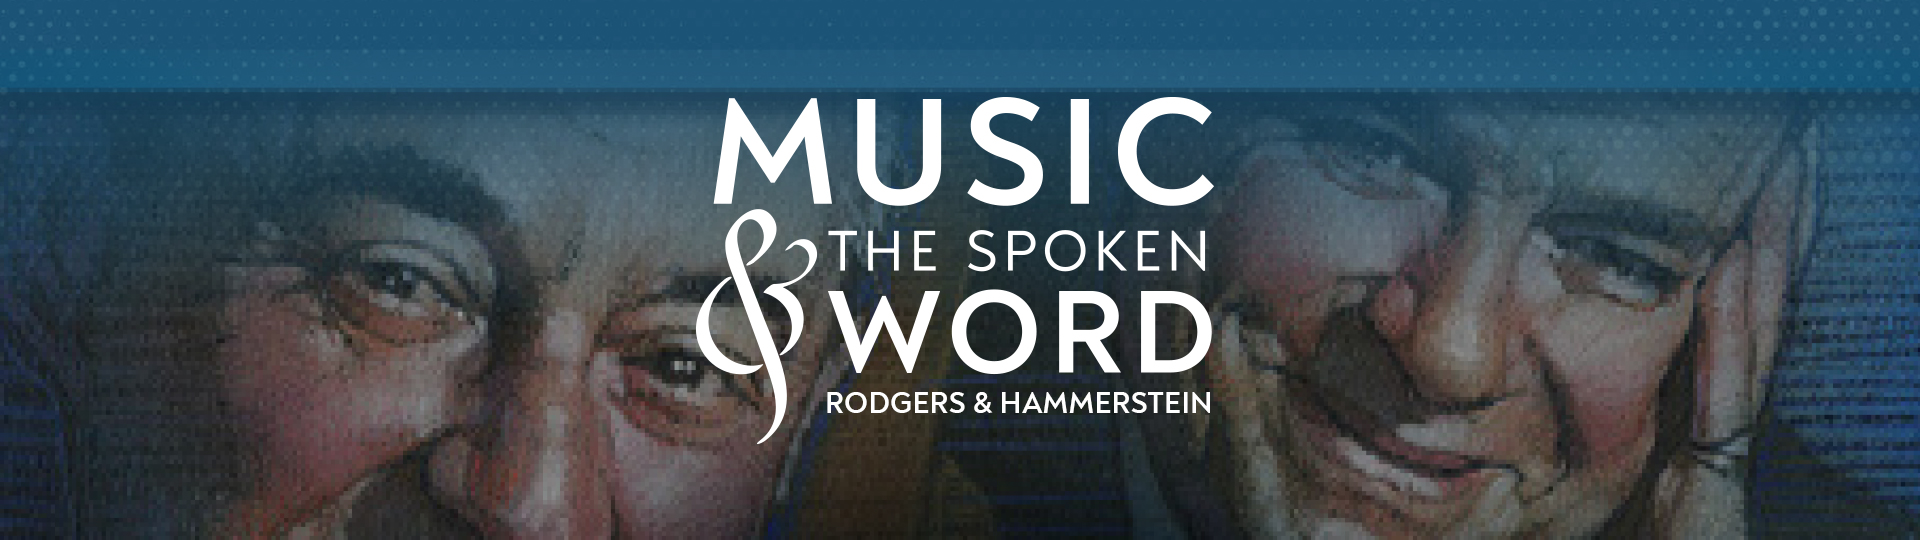 Tribute to Rodgers and Hammerstein